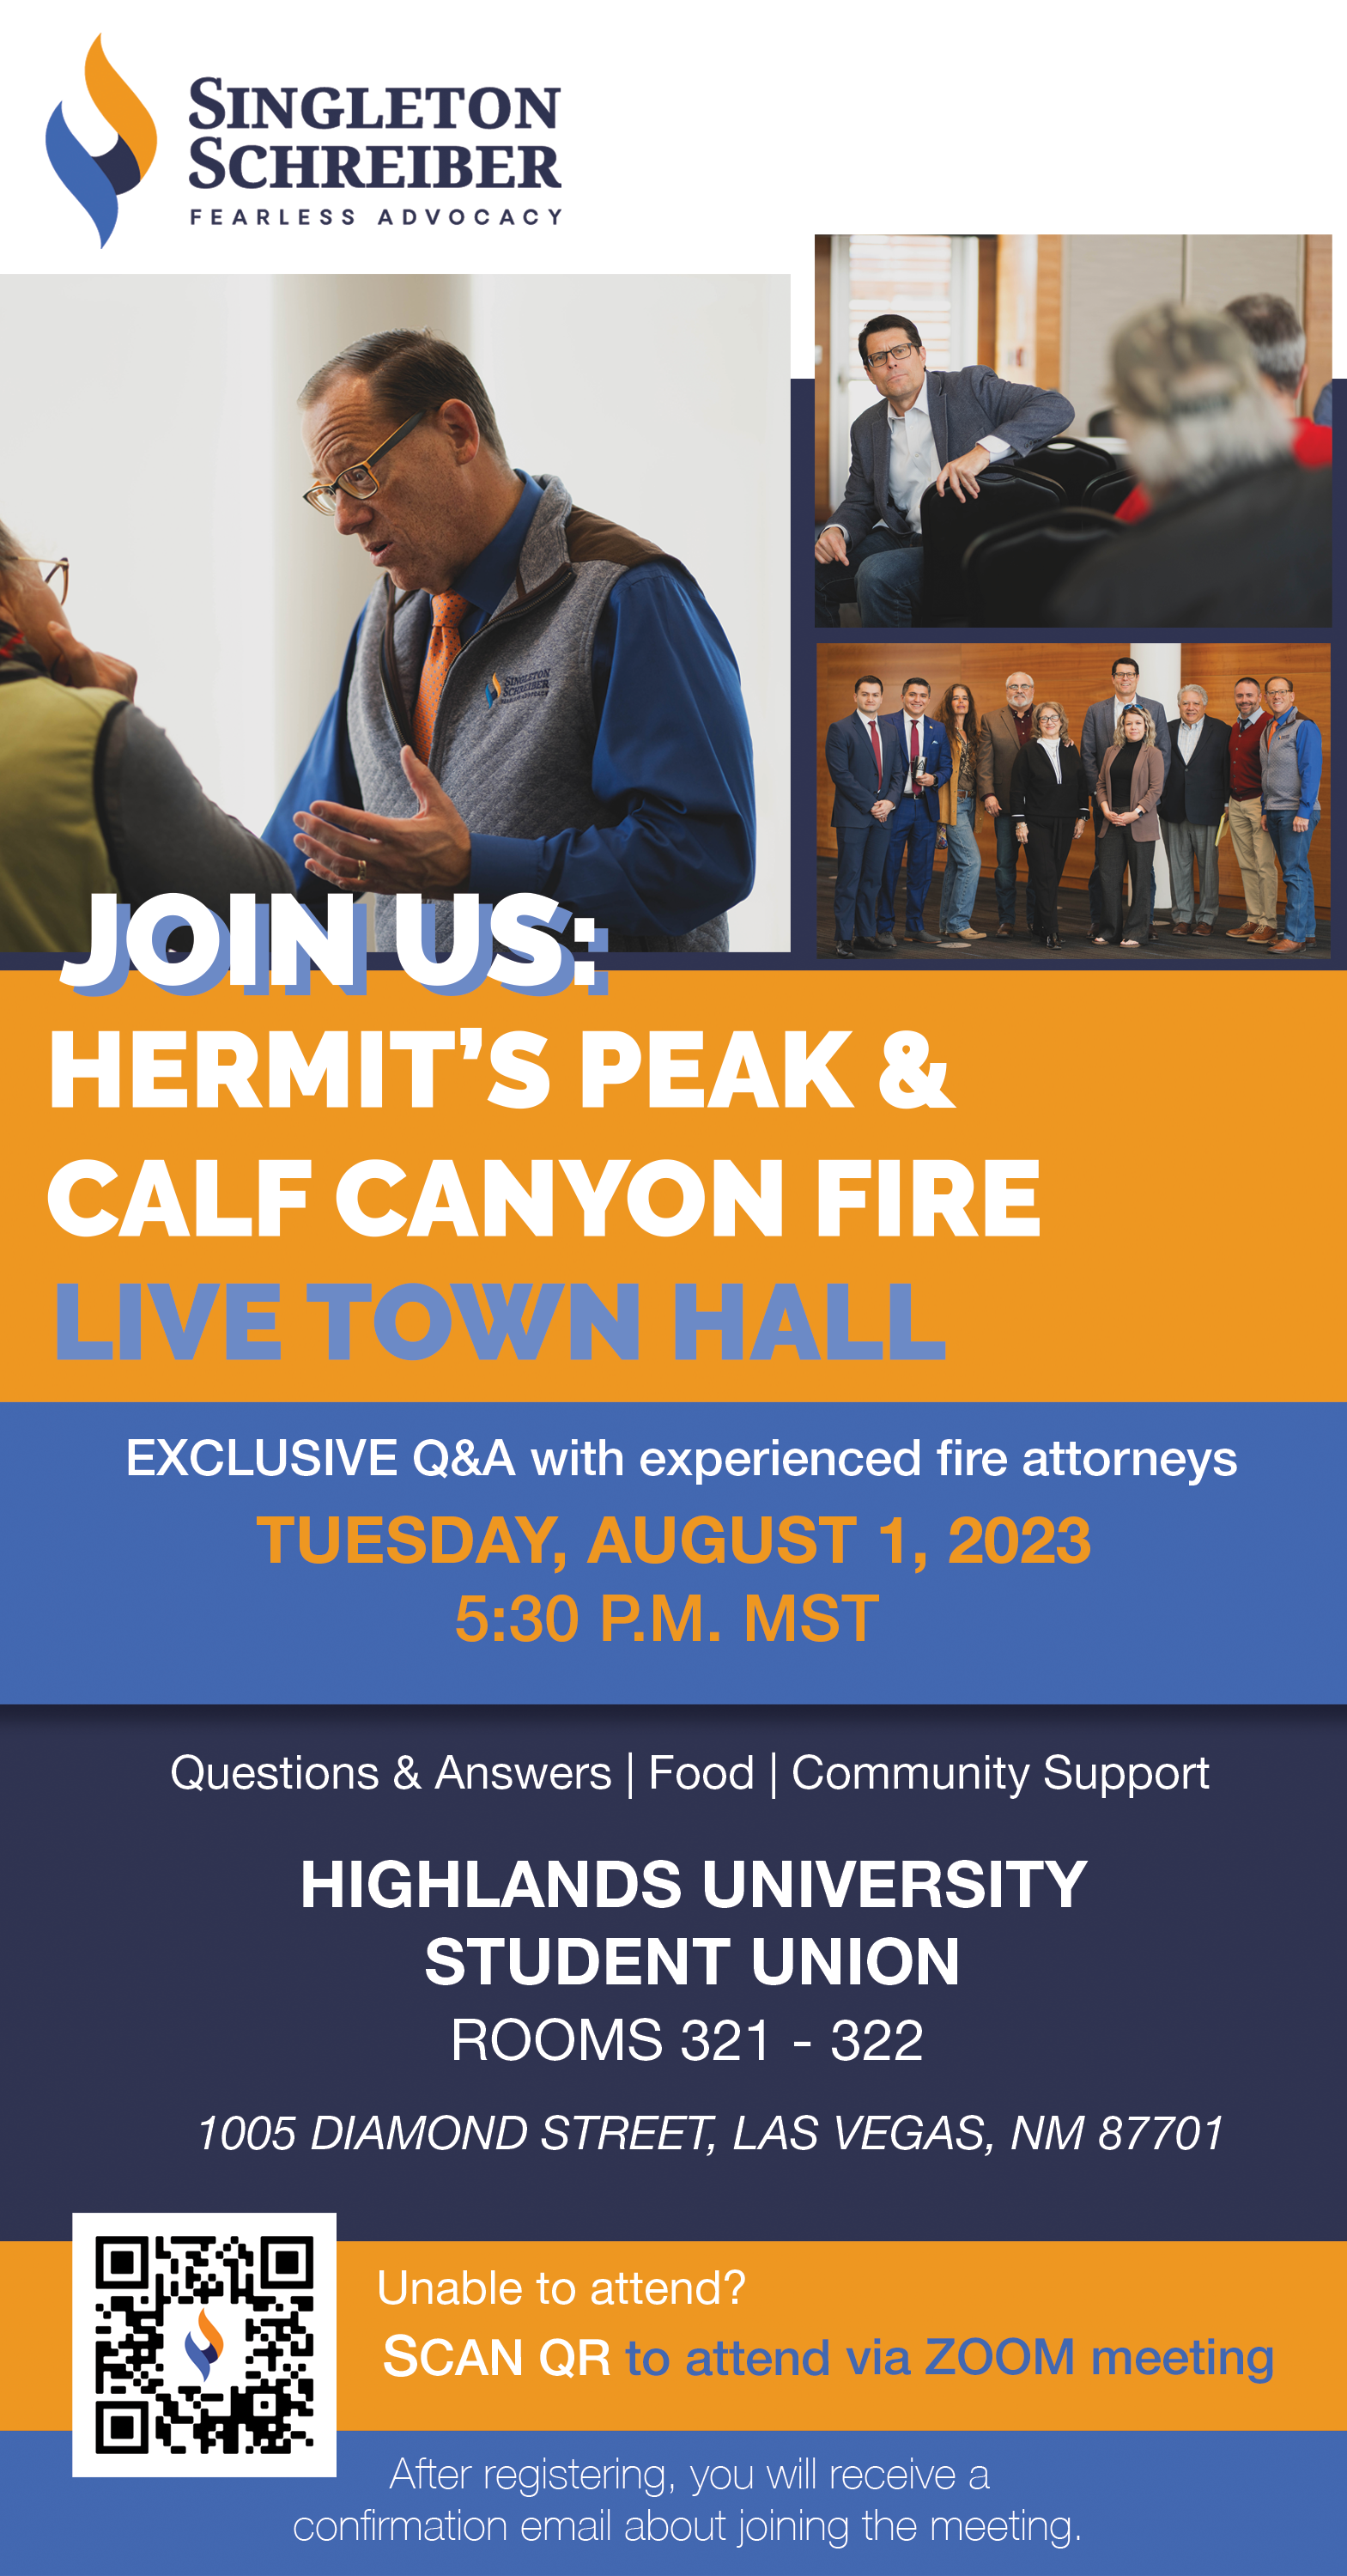 Hermit's Peak & Calf Canyon Fire LIVE Town Hall